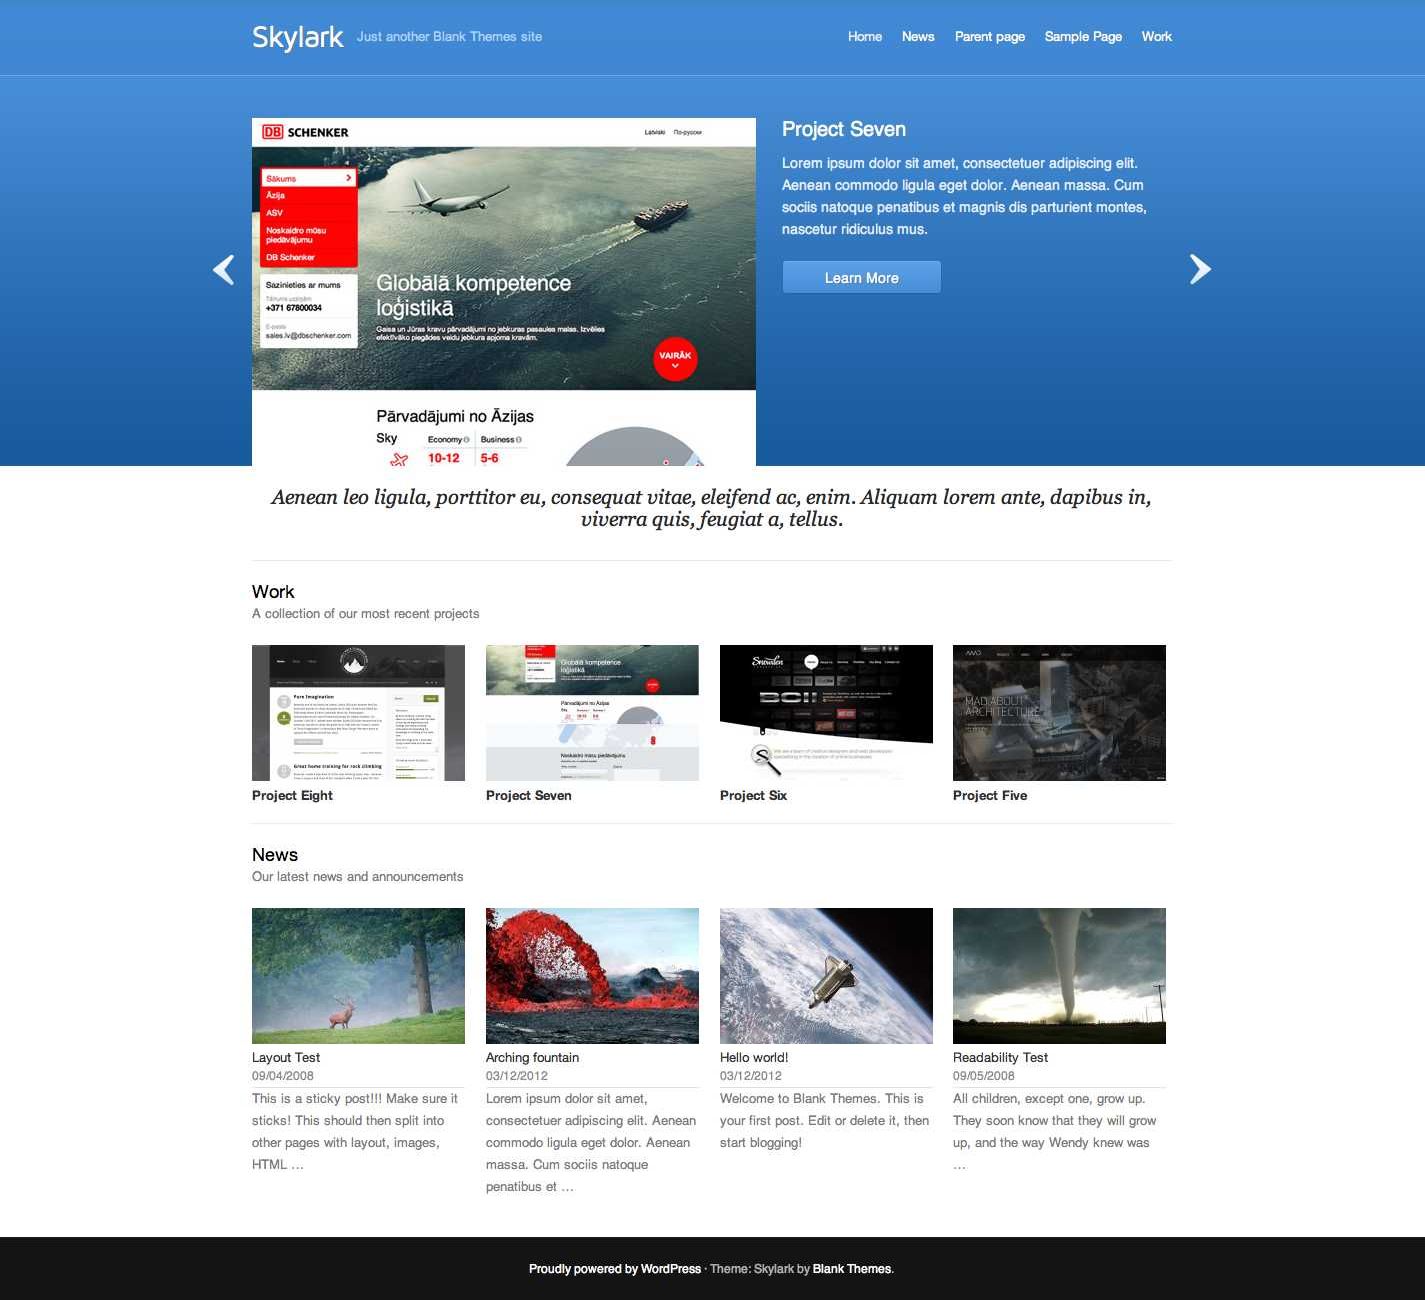 Skylark | Just another Blank Themes site